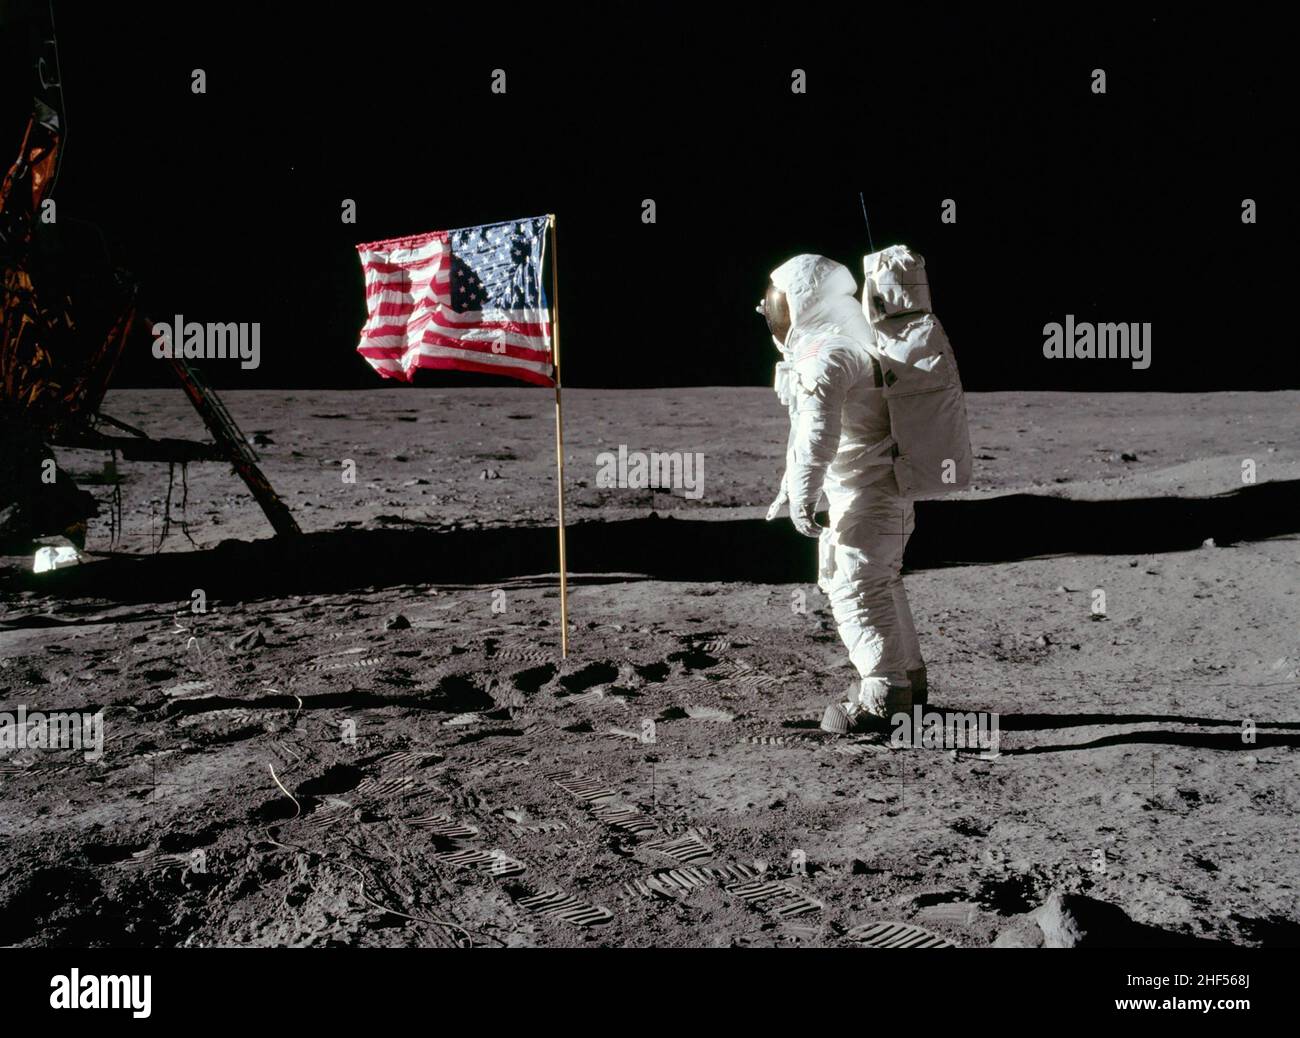 Buzz Aldrin salutes the U.S. Flag - 20 July 1969. Photo by Neil Armstrong / NASA. Apollo 11 mission. Stock Photo